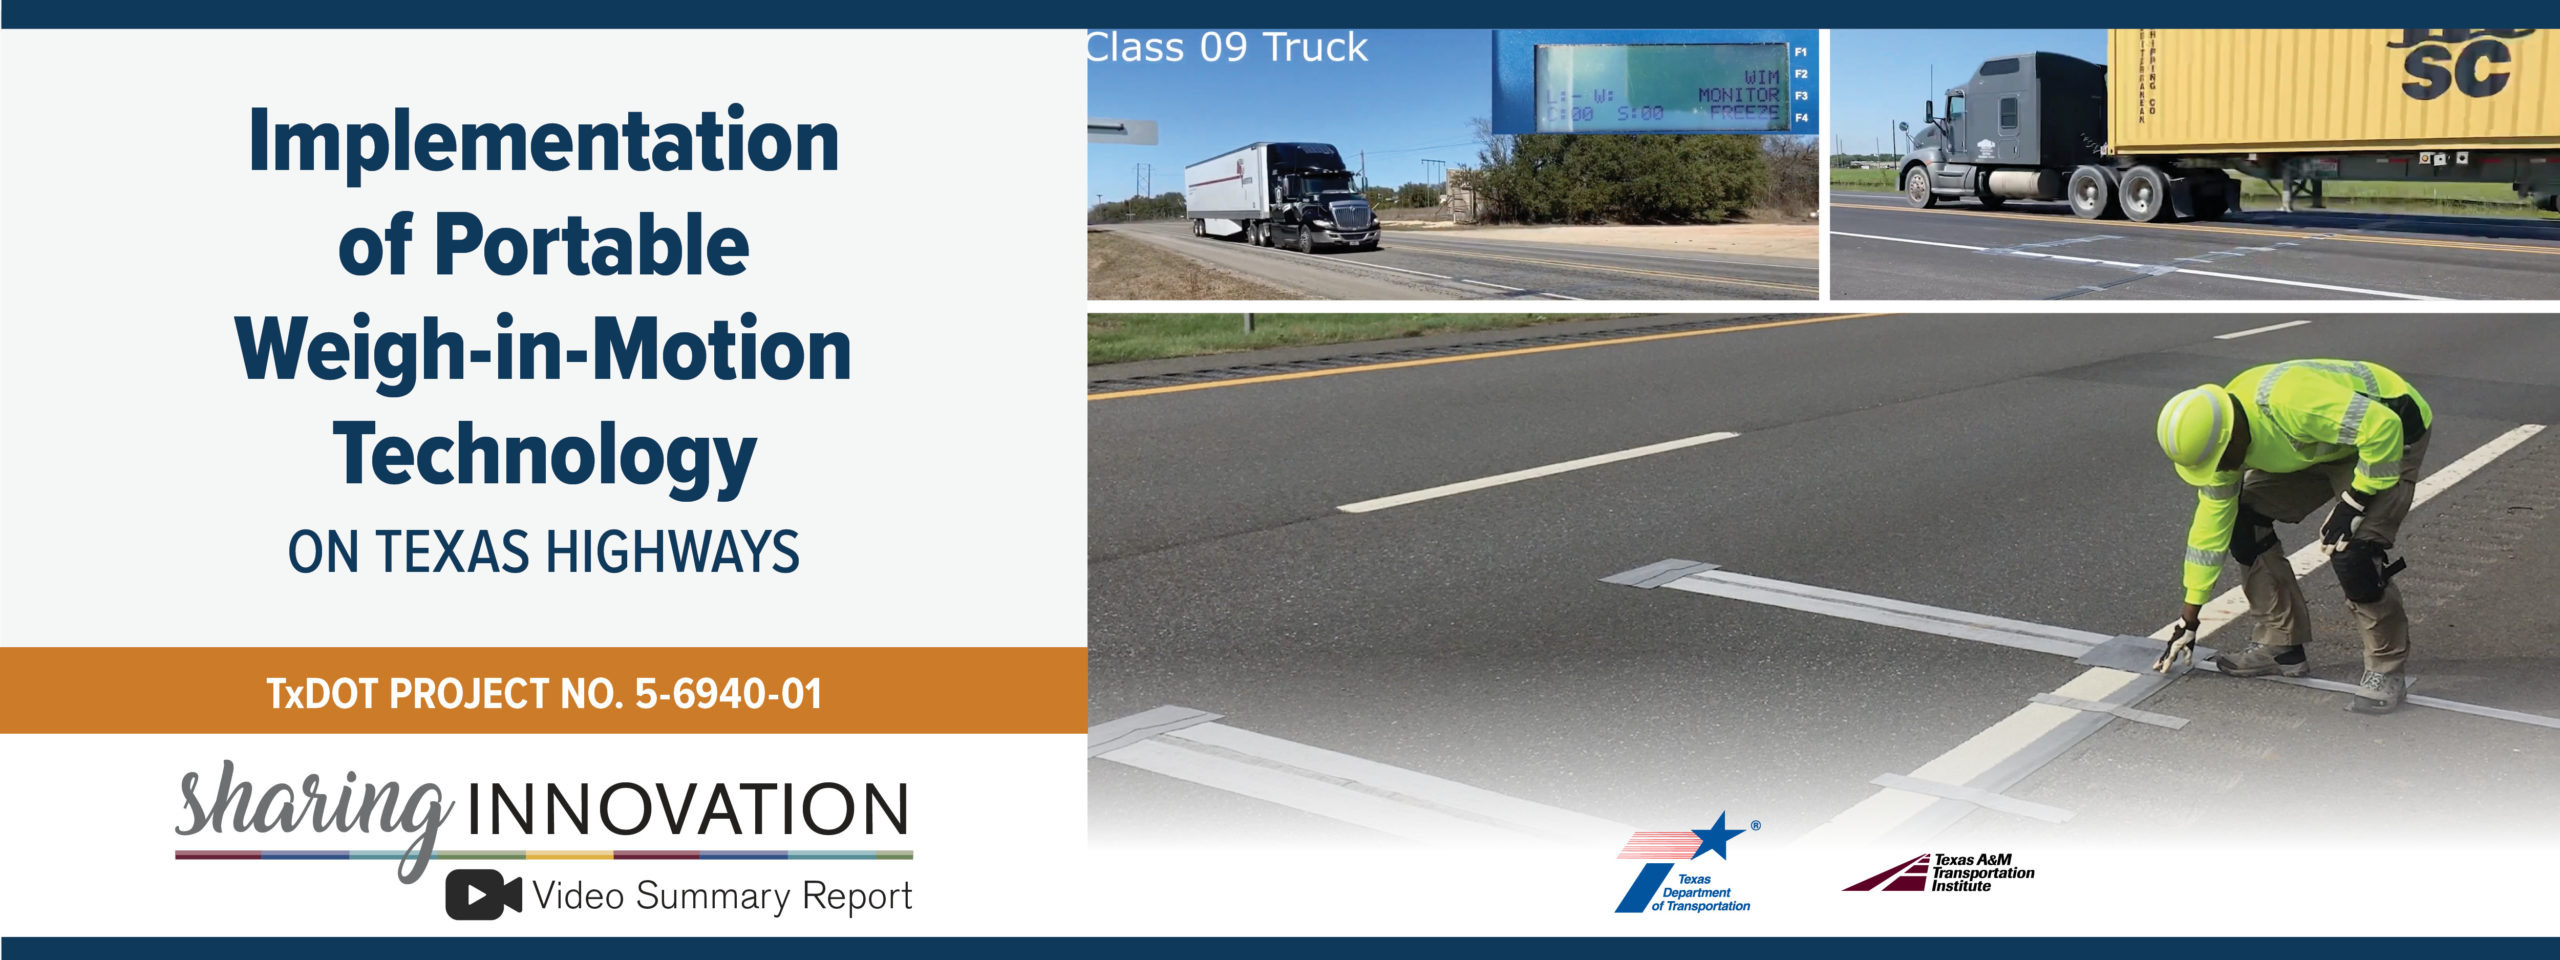 Photos of large trucks on roadways and a photo of a person in a safety vest putting marks on a road. Text has title of video summary report and logos for TxDOT, TTI and Sharing Innovation.